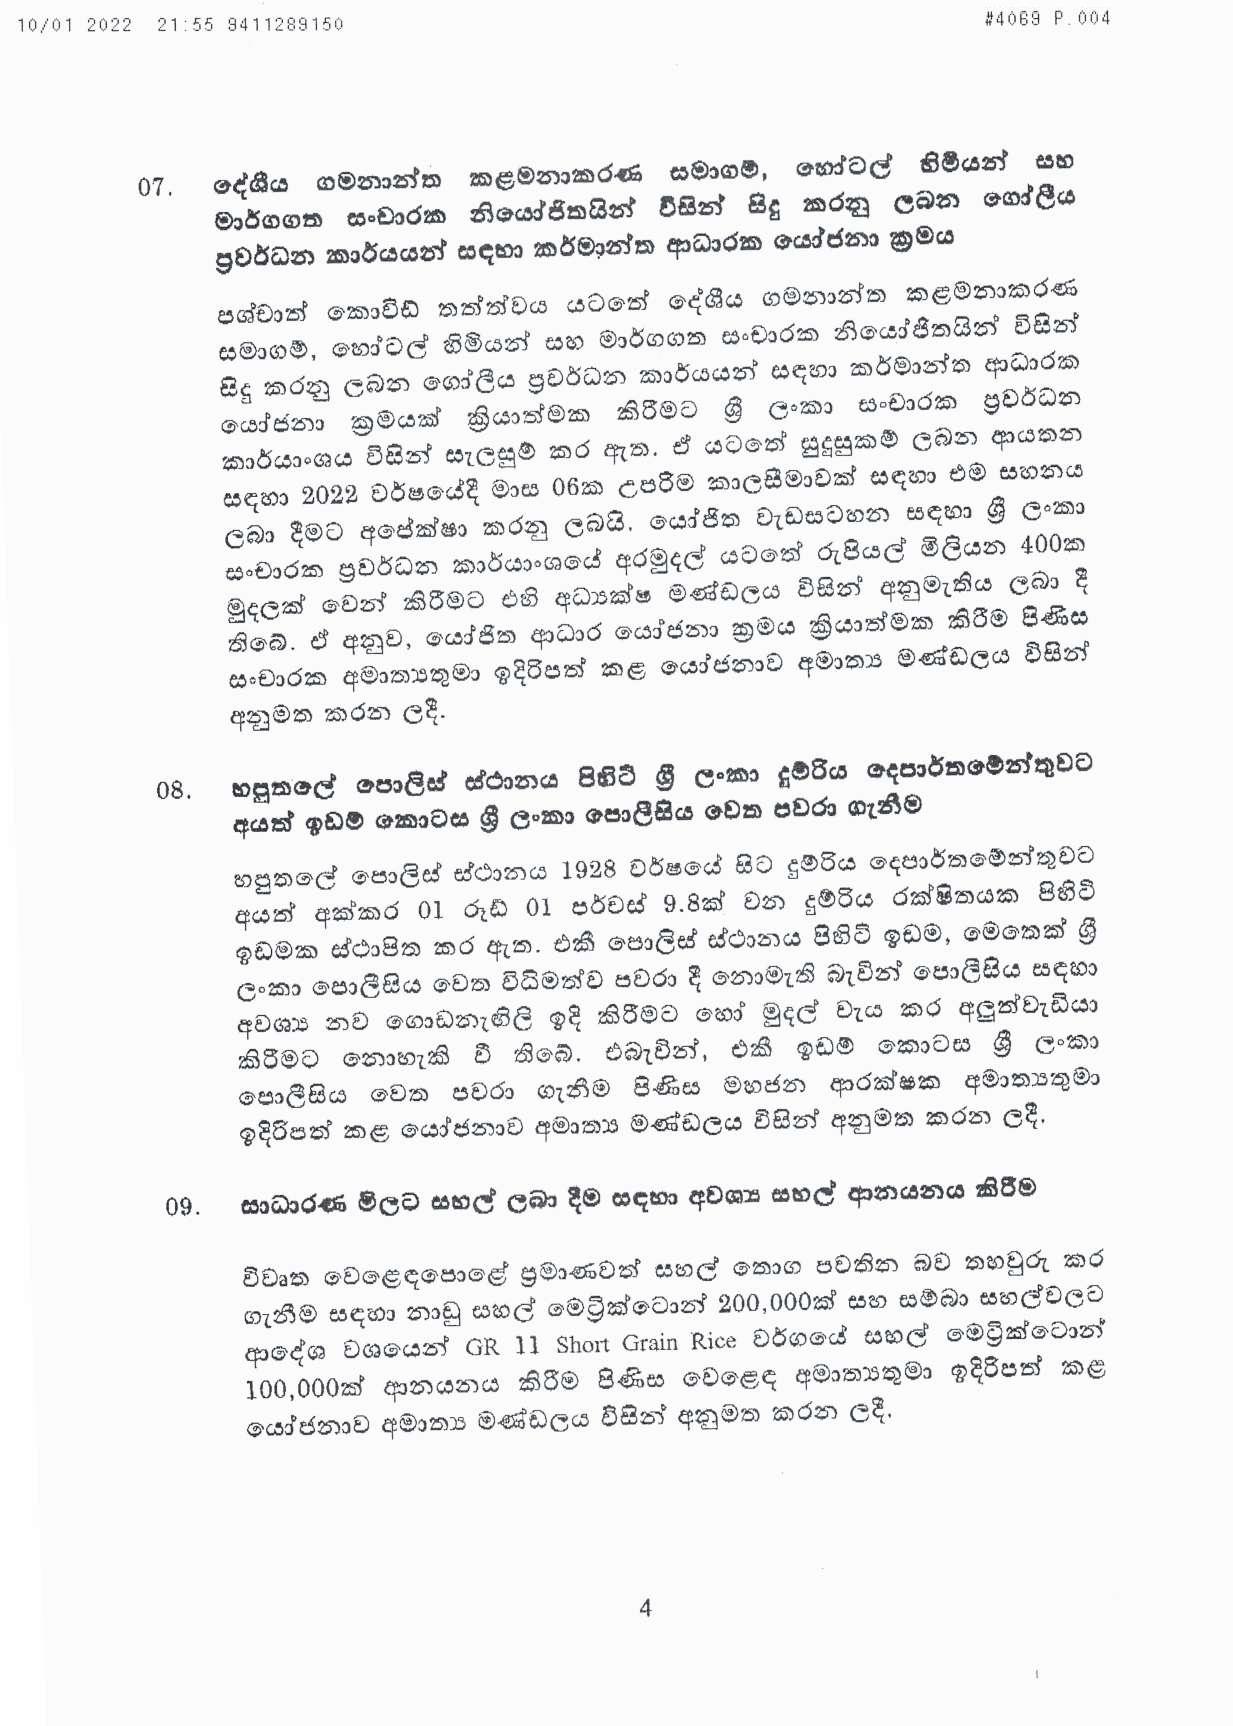 Cabinet Decision on 10.01.2022 page 004